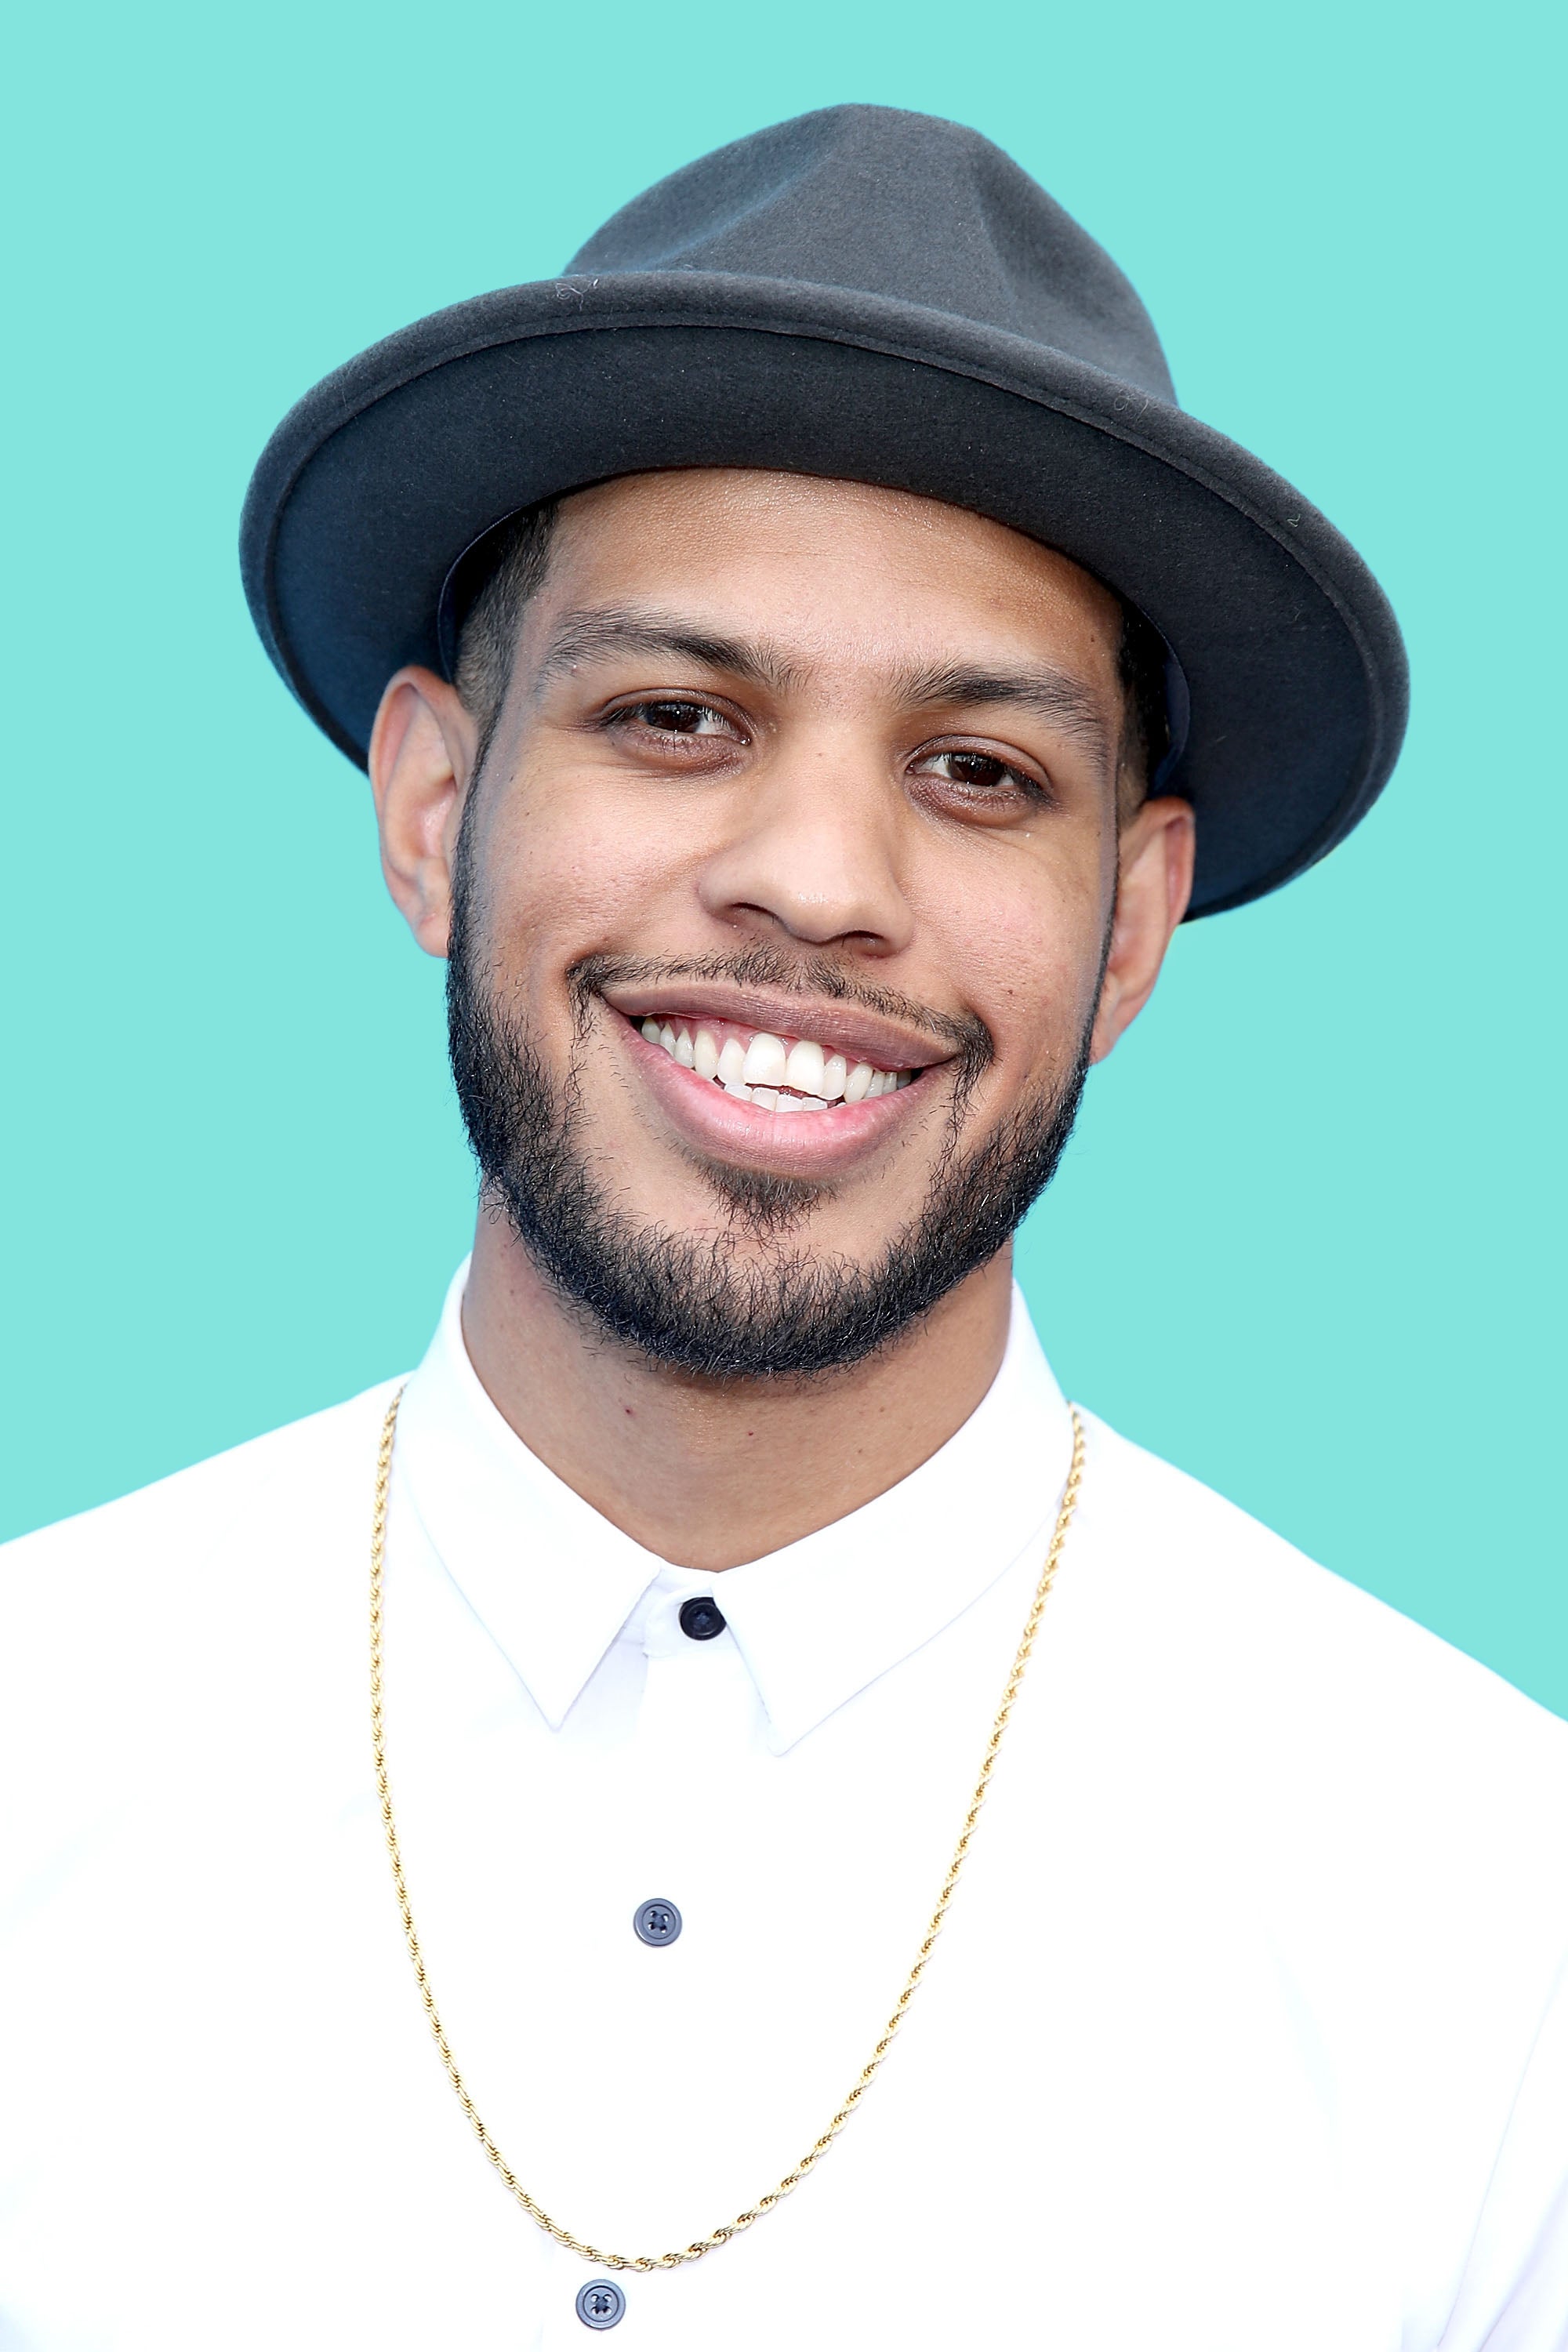 5 Things To Know About 'Insecure' Actor Sarunas J. Jackson
